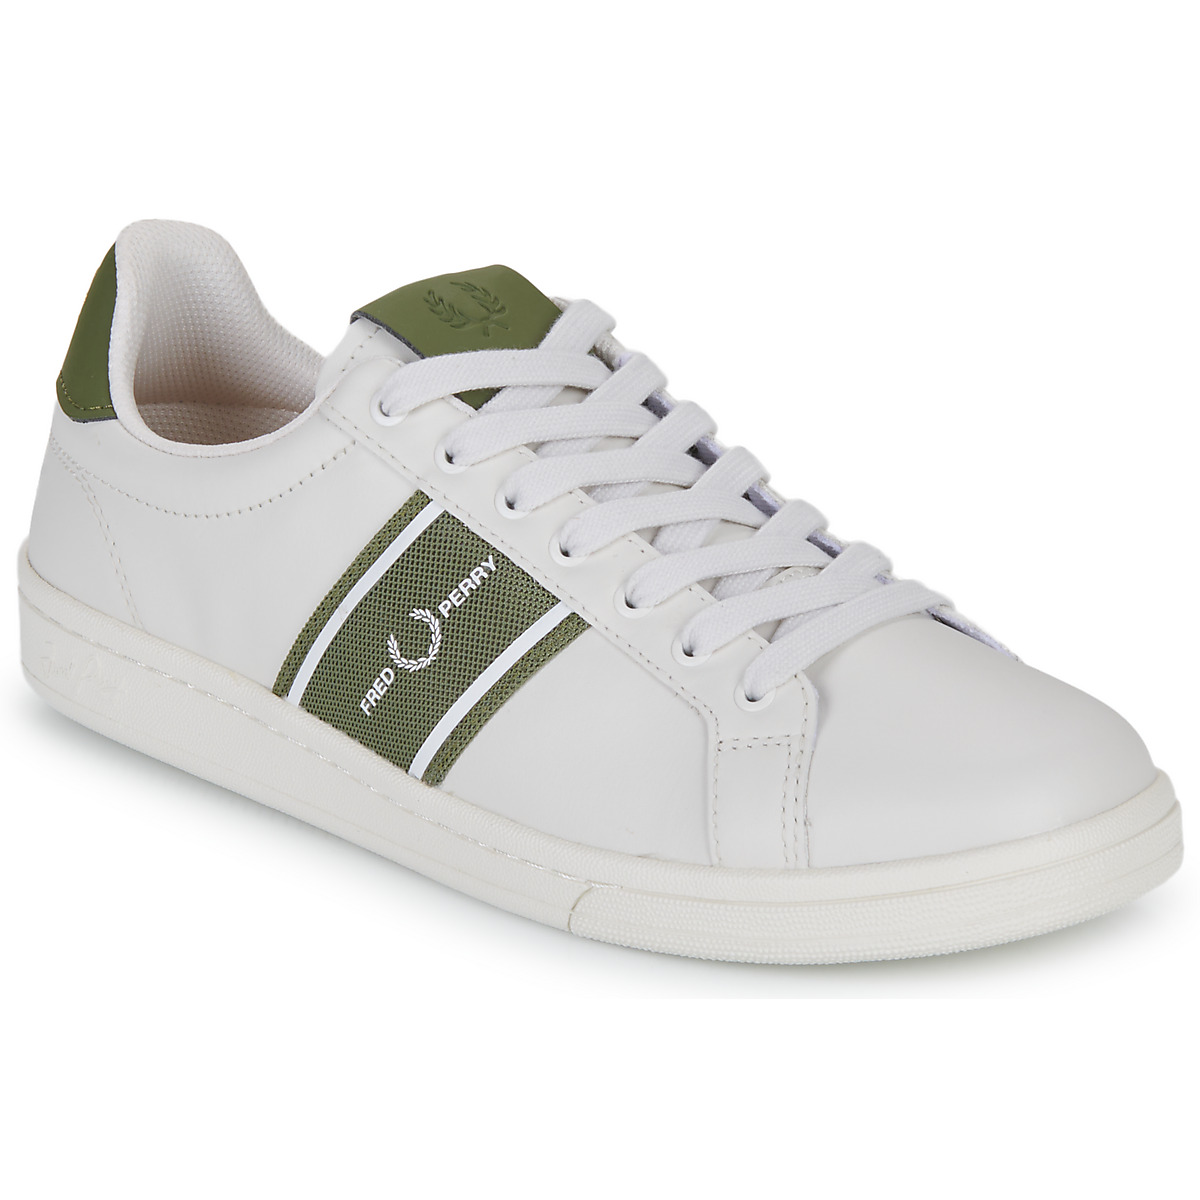 Fred Perry Porcelaine / Olive B721 LEA GRAPHIC BRAND MESH hNXxebR1